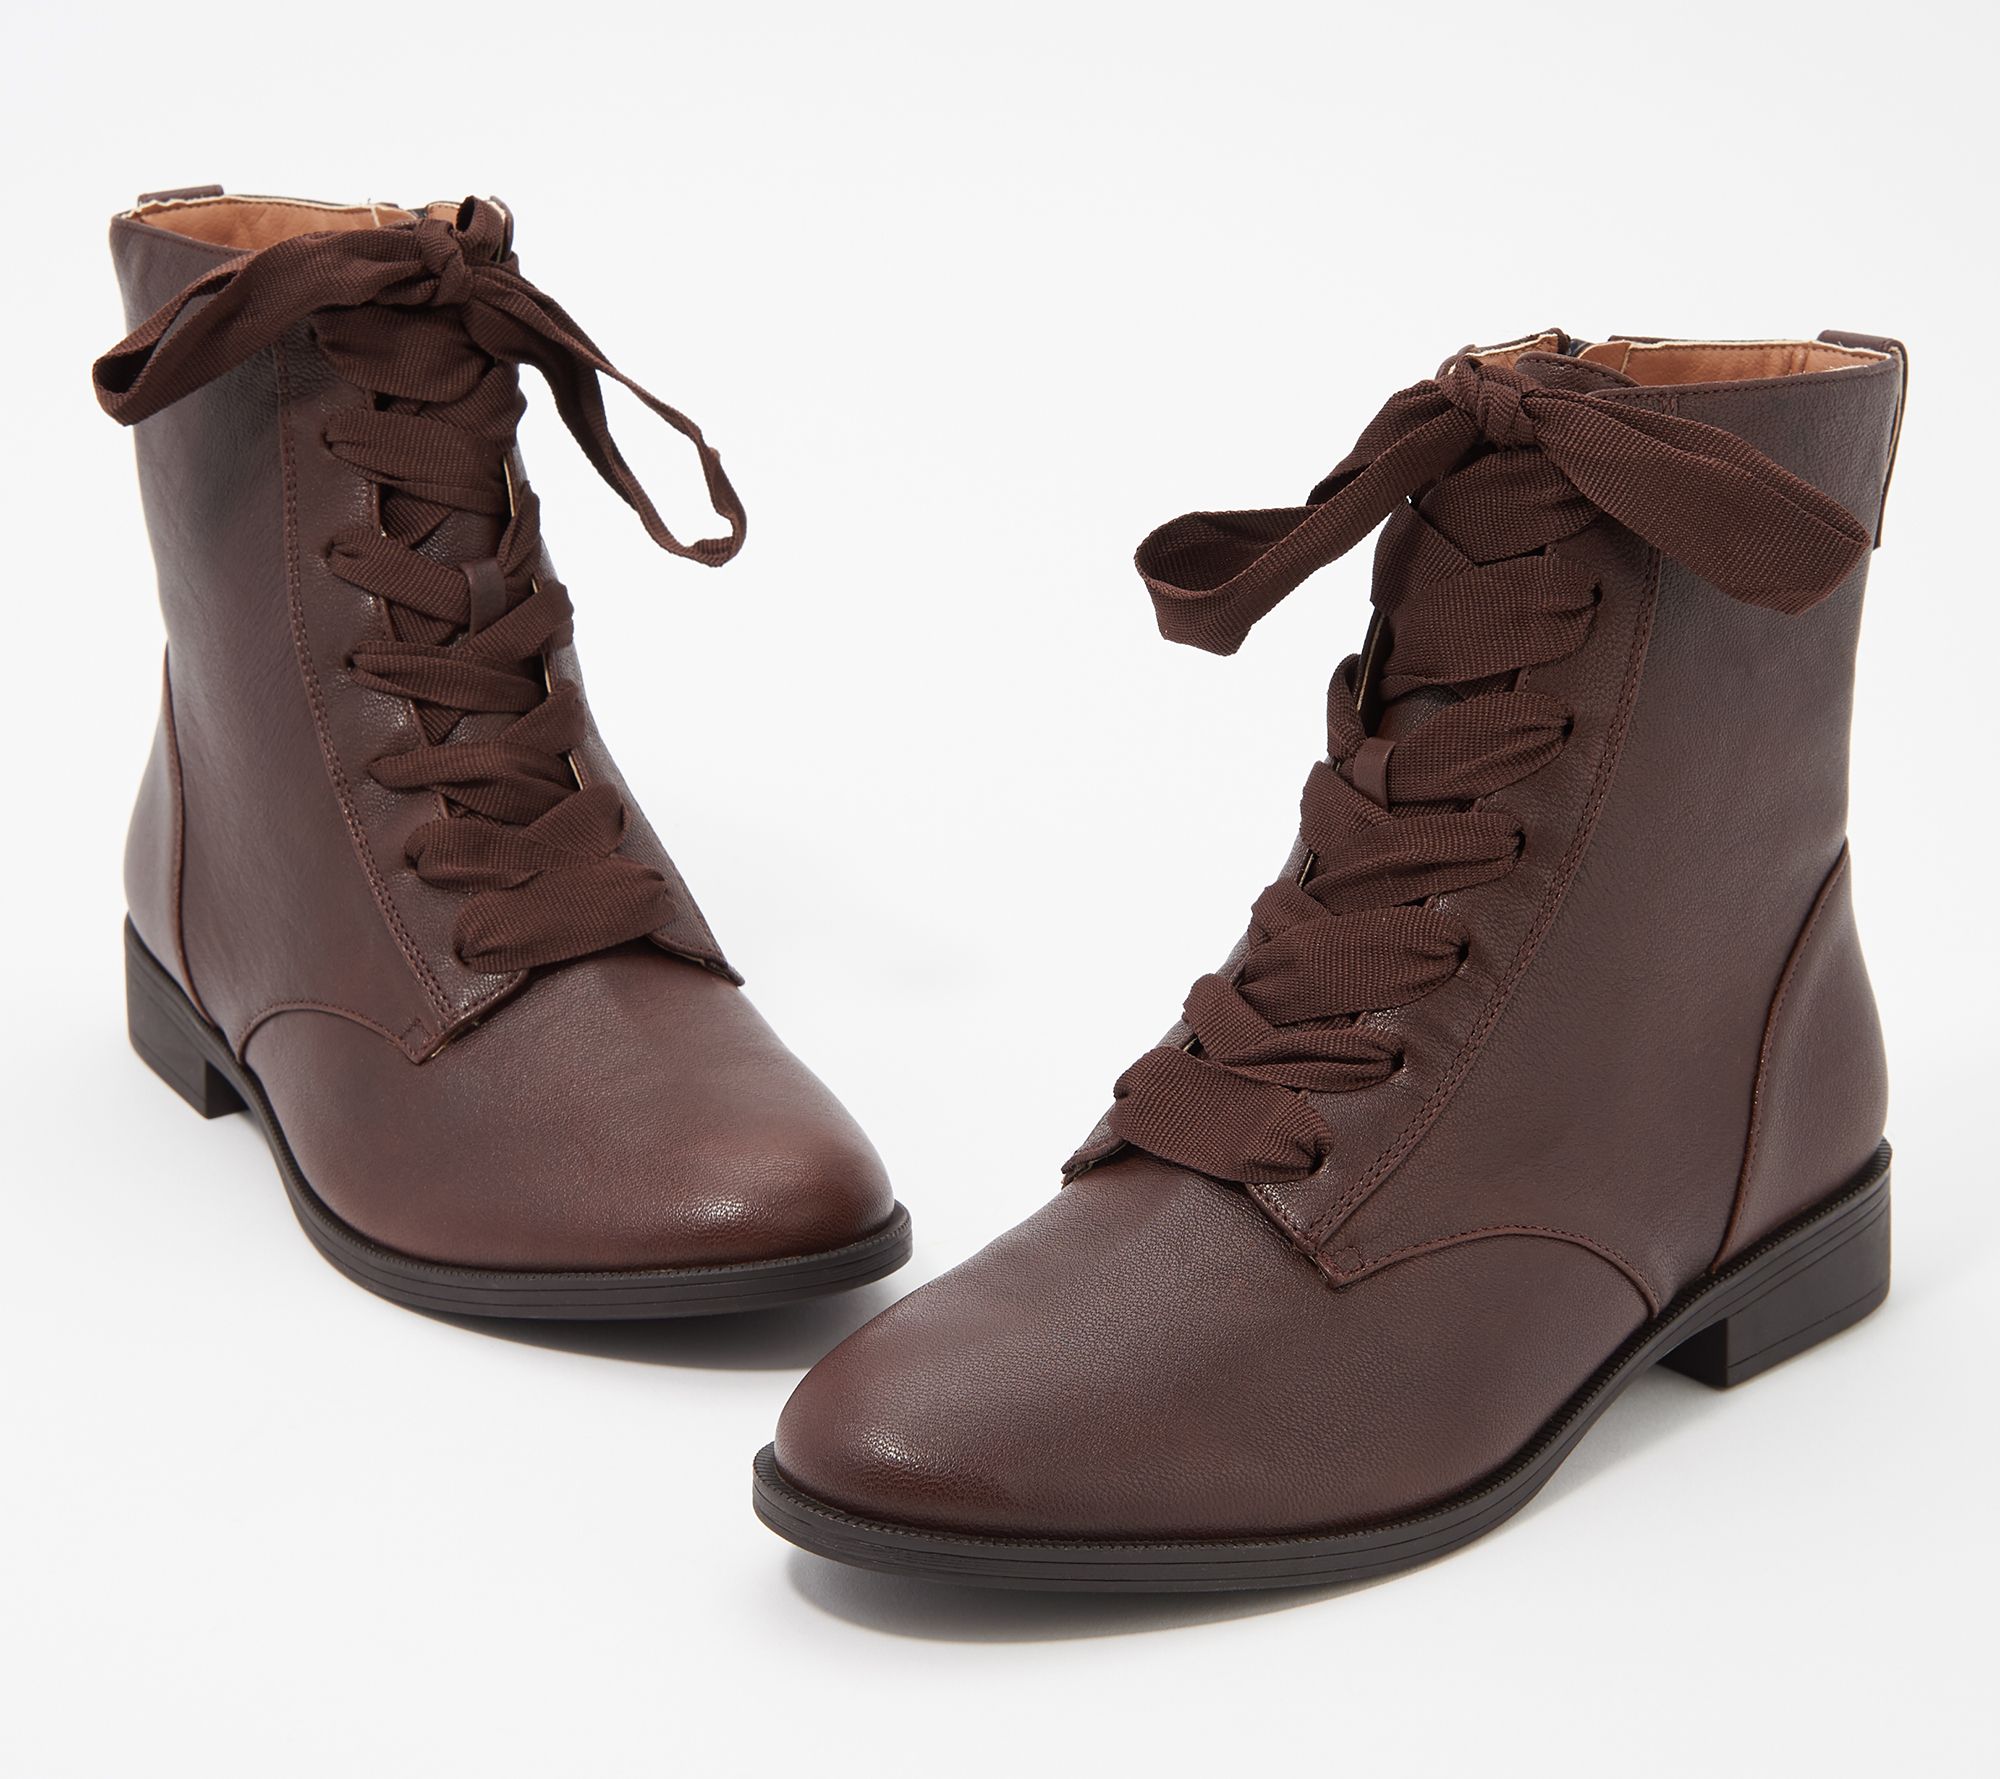 leather lace up ankle boots